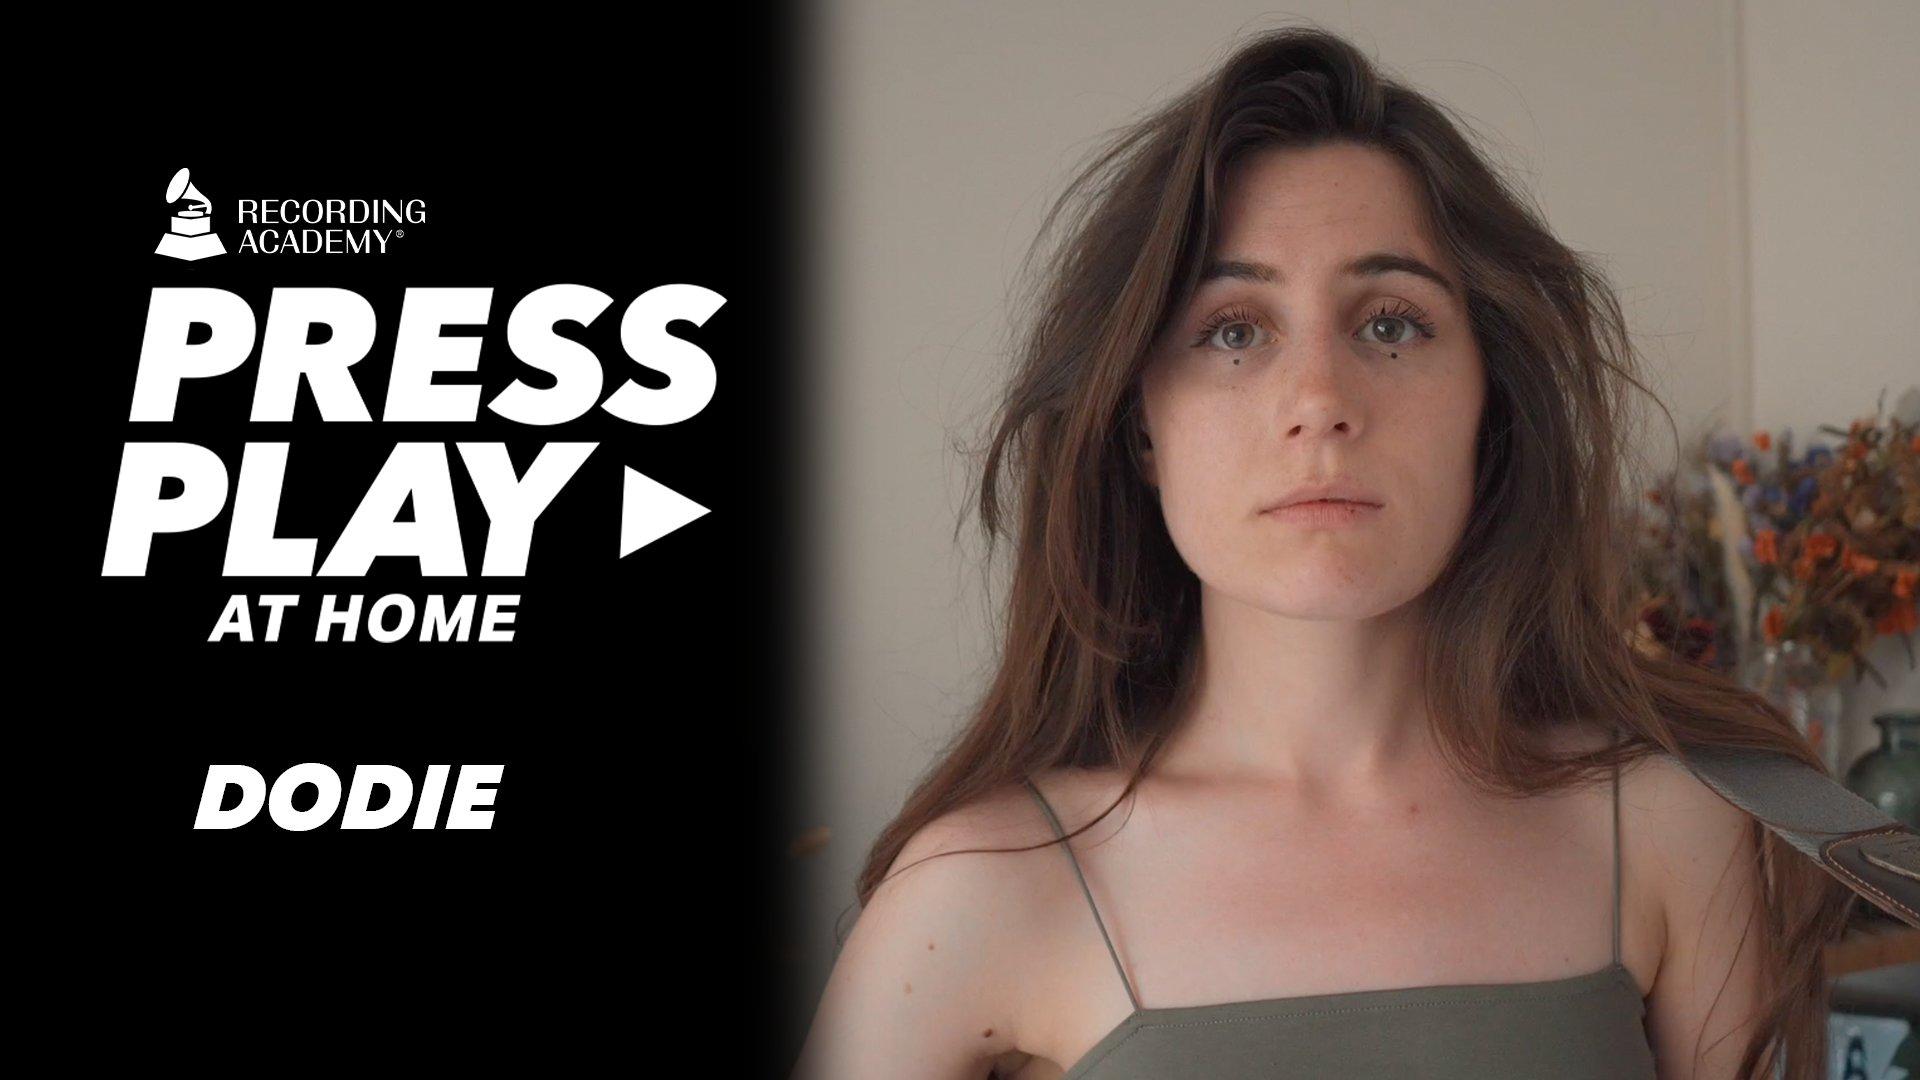 Watch Dodie Perform A Bleary "Four Tequilas Down"